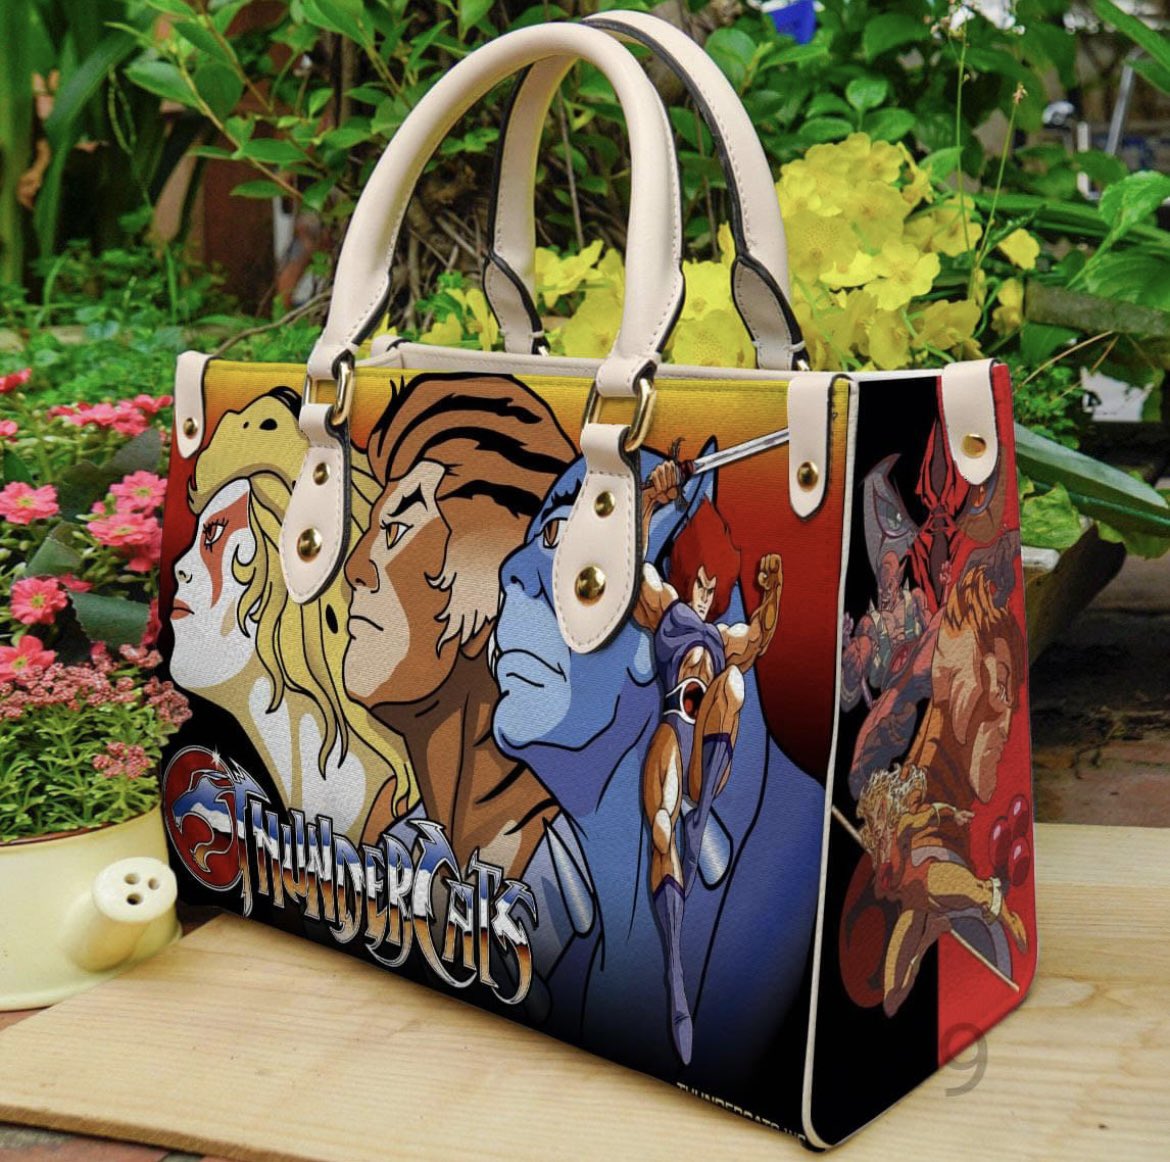 What a kool looking Bag  love it. Where can i get it? #thundercats